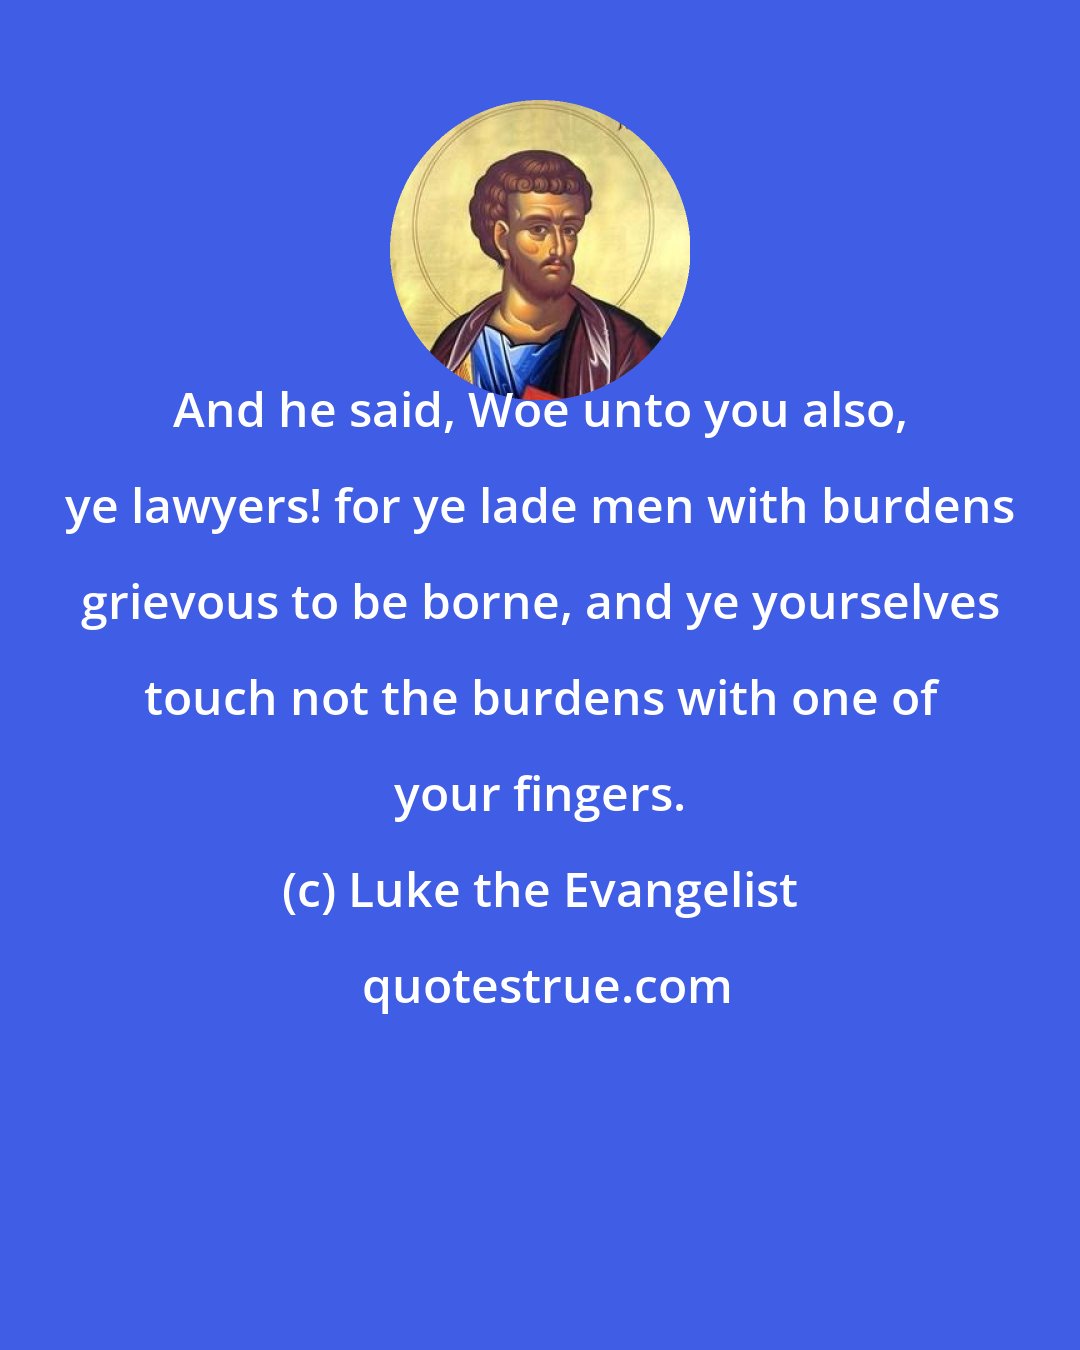 Luke the Evangelist: And he said, Woe unto you also, ye lawyers! for ye lade men with burdens grievous to be borne, and ye yourselves touch not the burdens with one of your fingers.